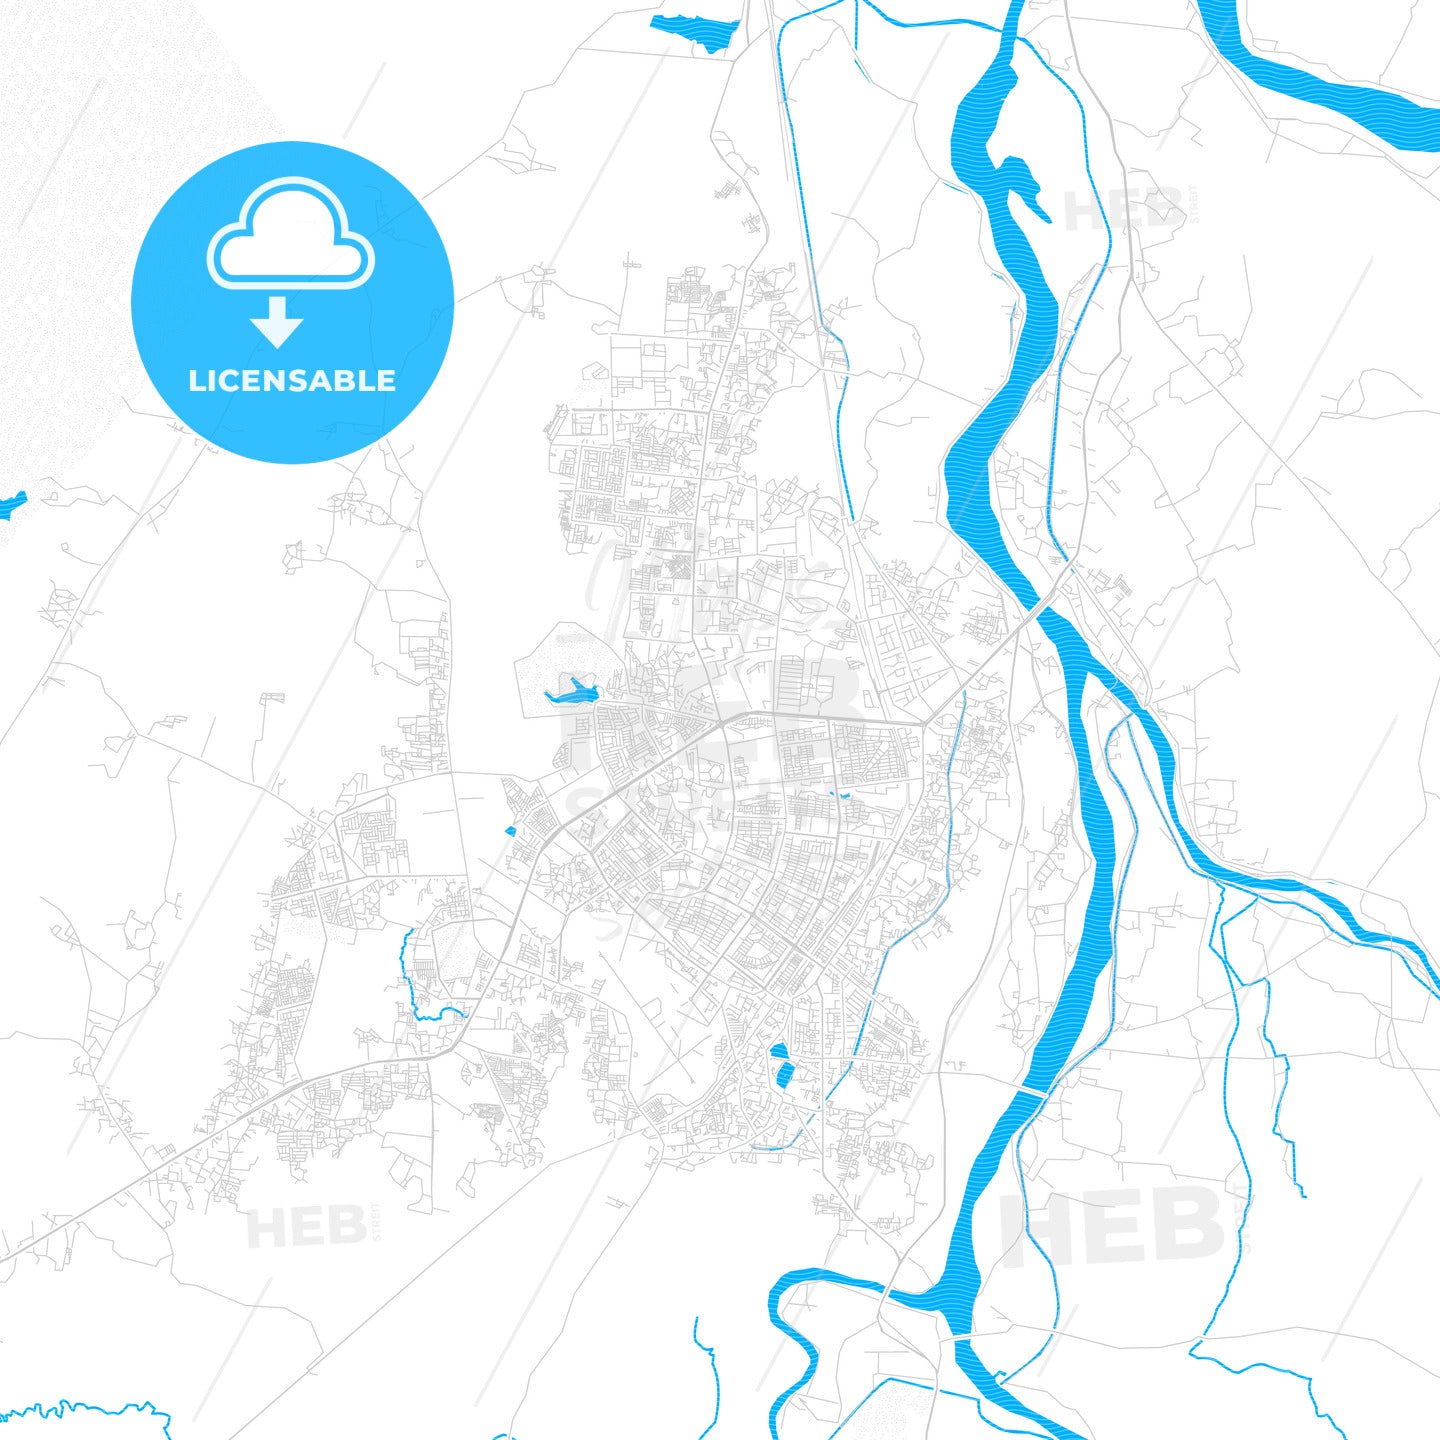 Bhubaneswar, India PDF vector map with water in focus